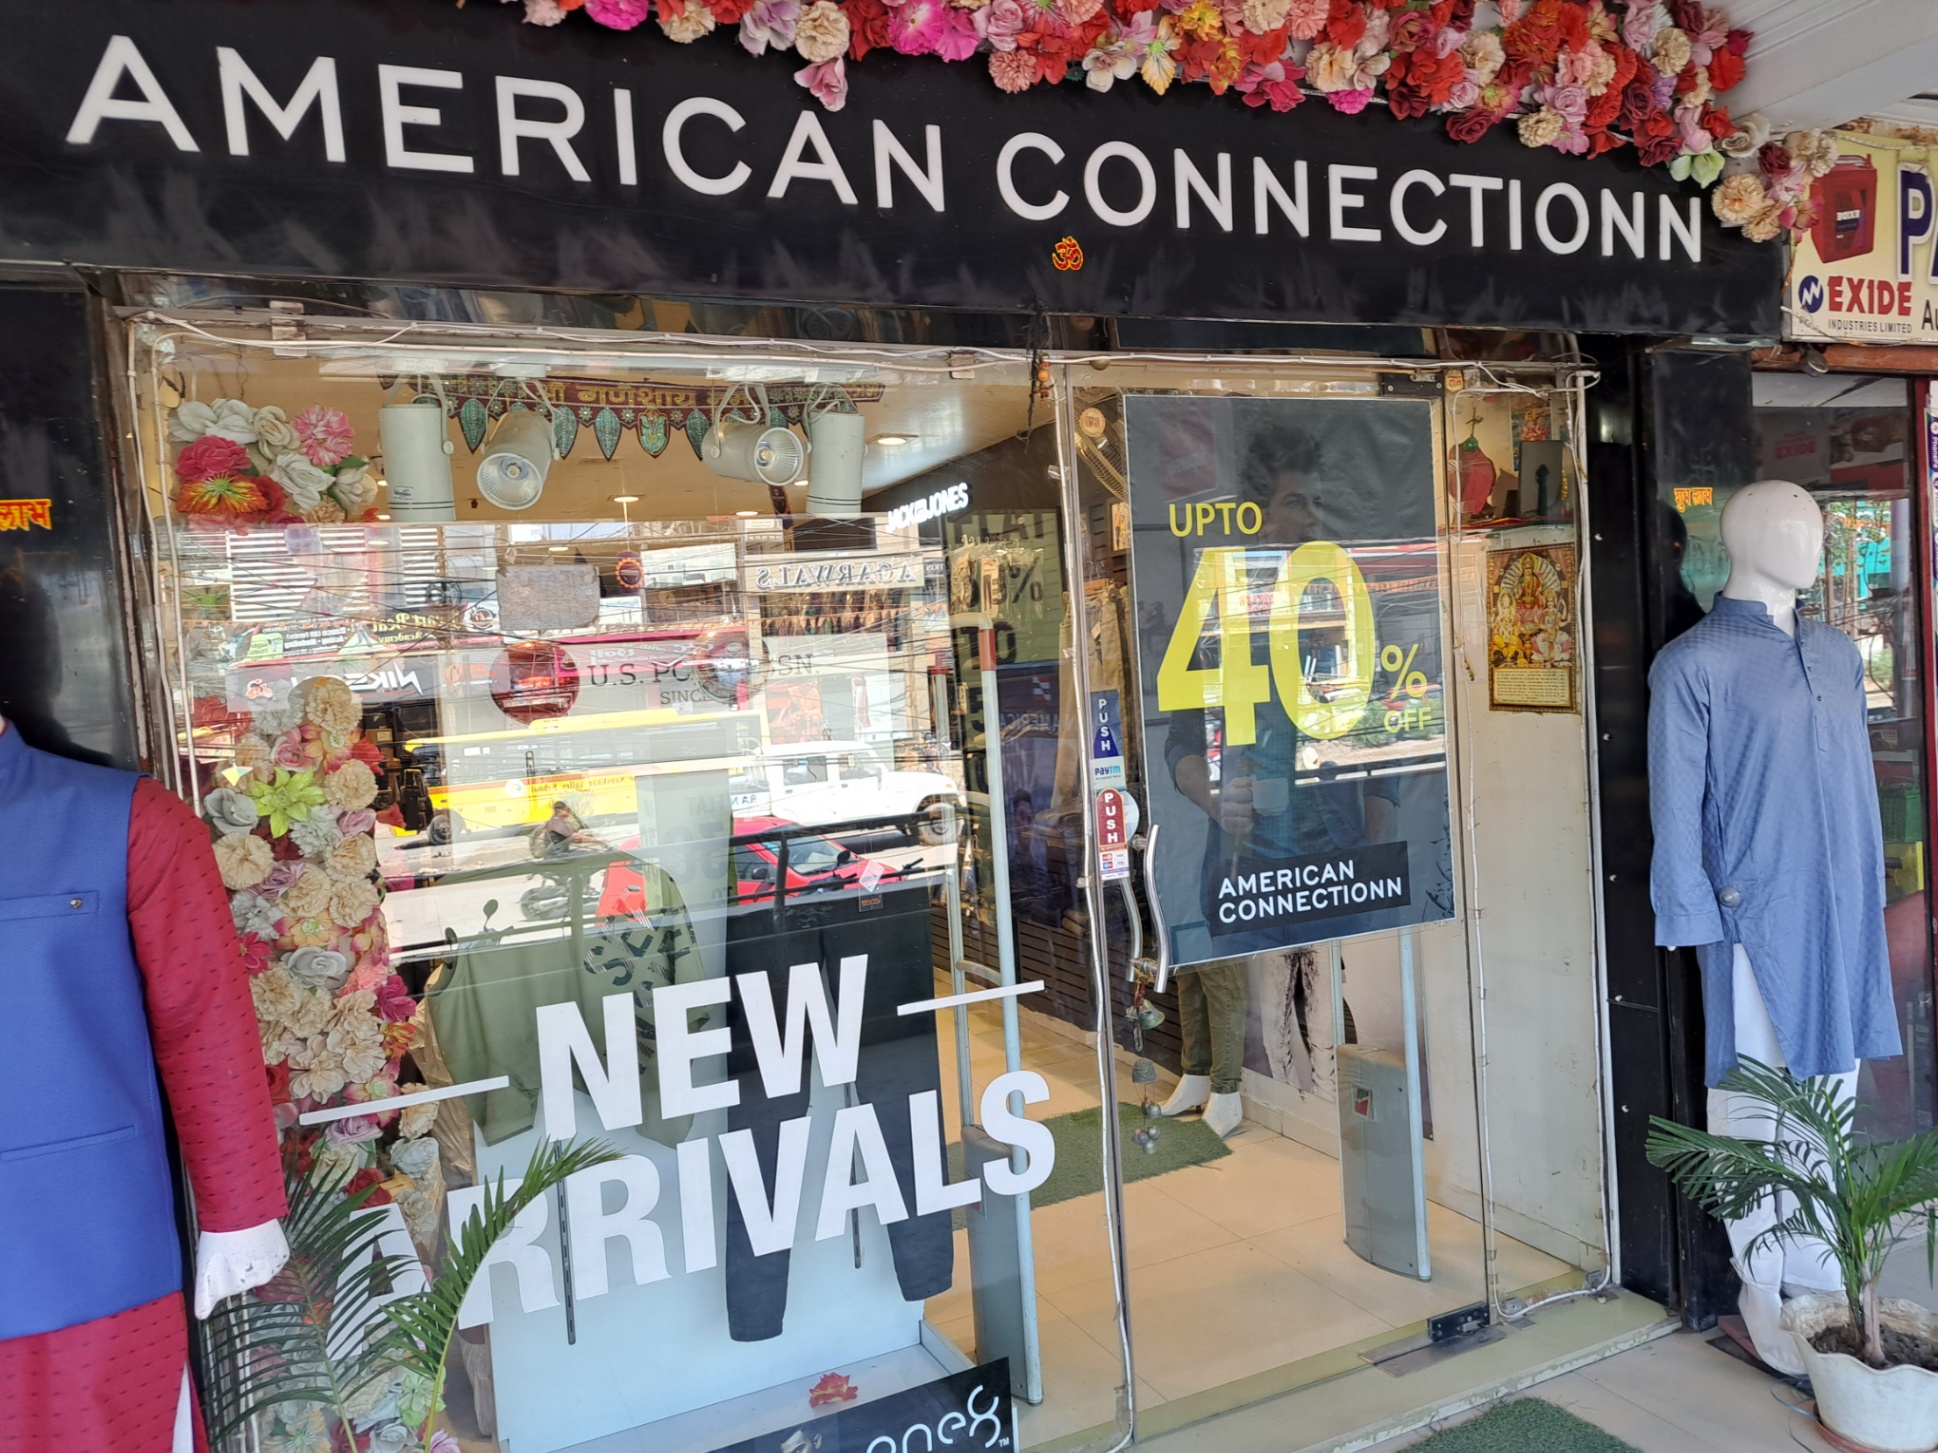 New Deal - Upto ₹40 off @Americon Connectionn, Bhopal